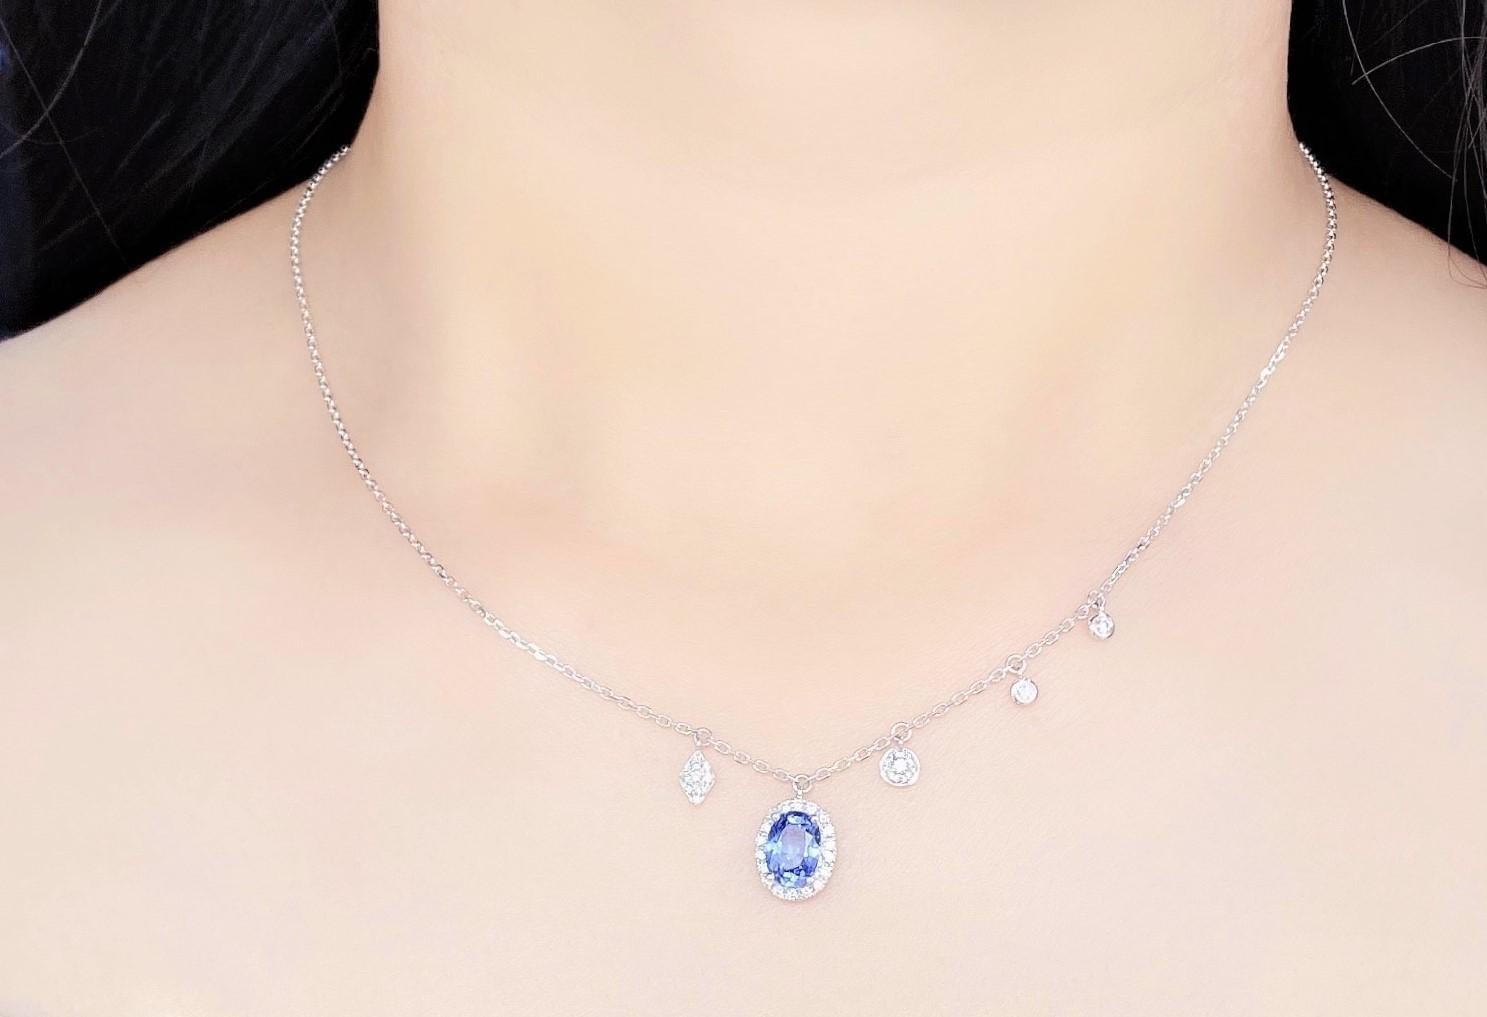 Women's $4, 119 Stunning 18Kt Gold Gorgeous Blue Sapphire and Diamond Pendant Necklace For Sale